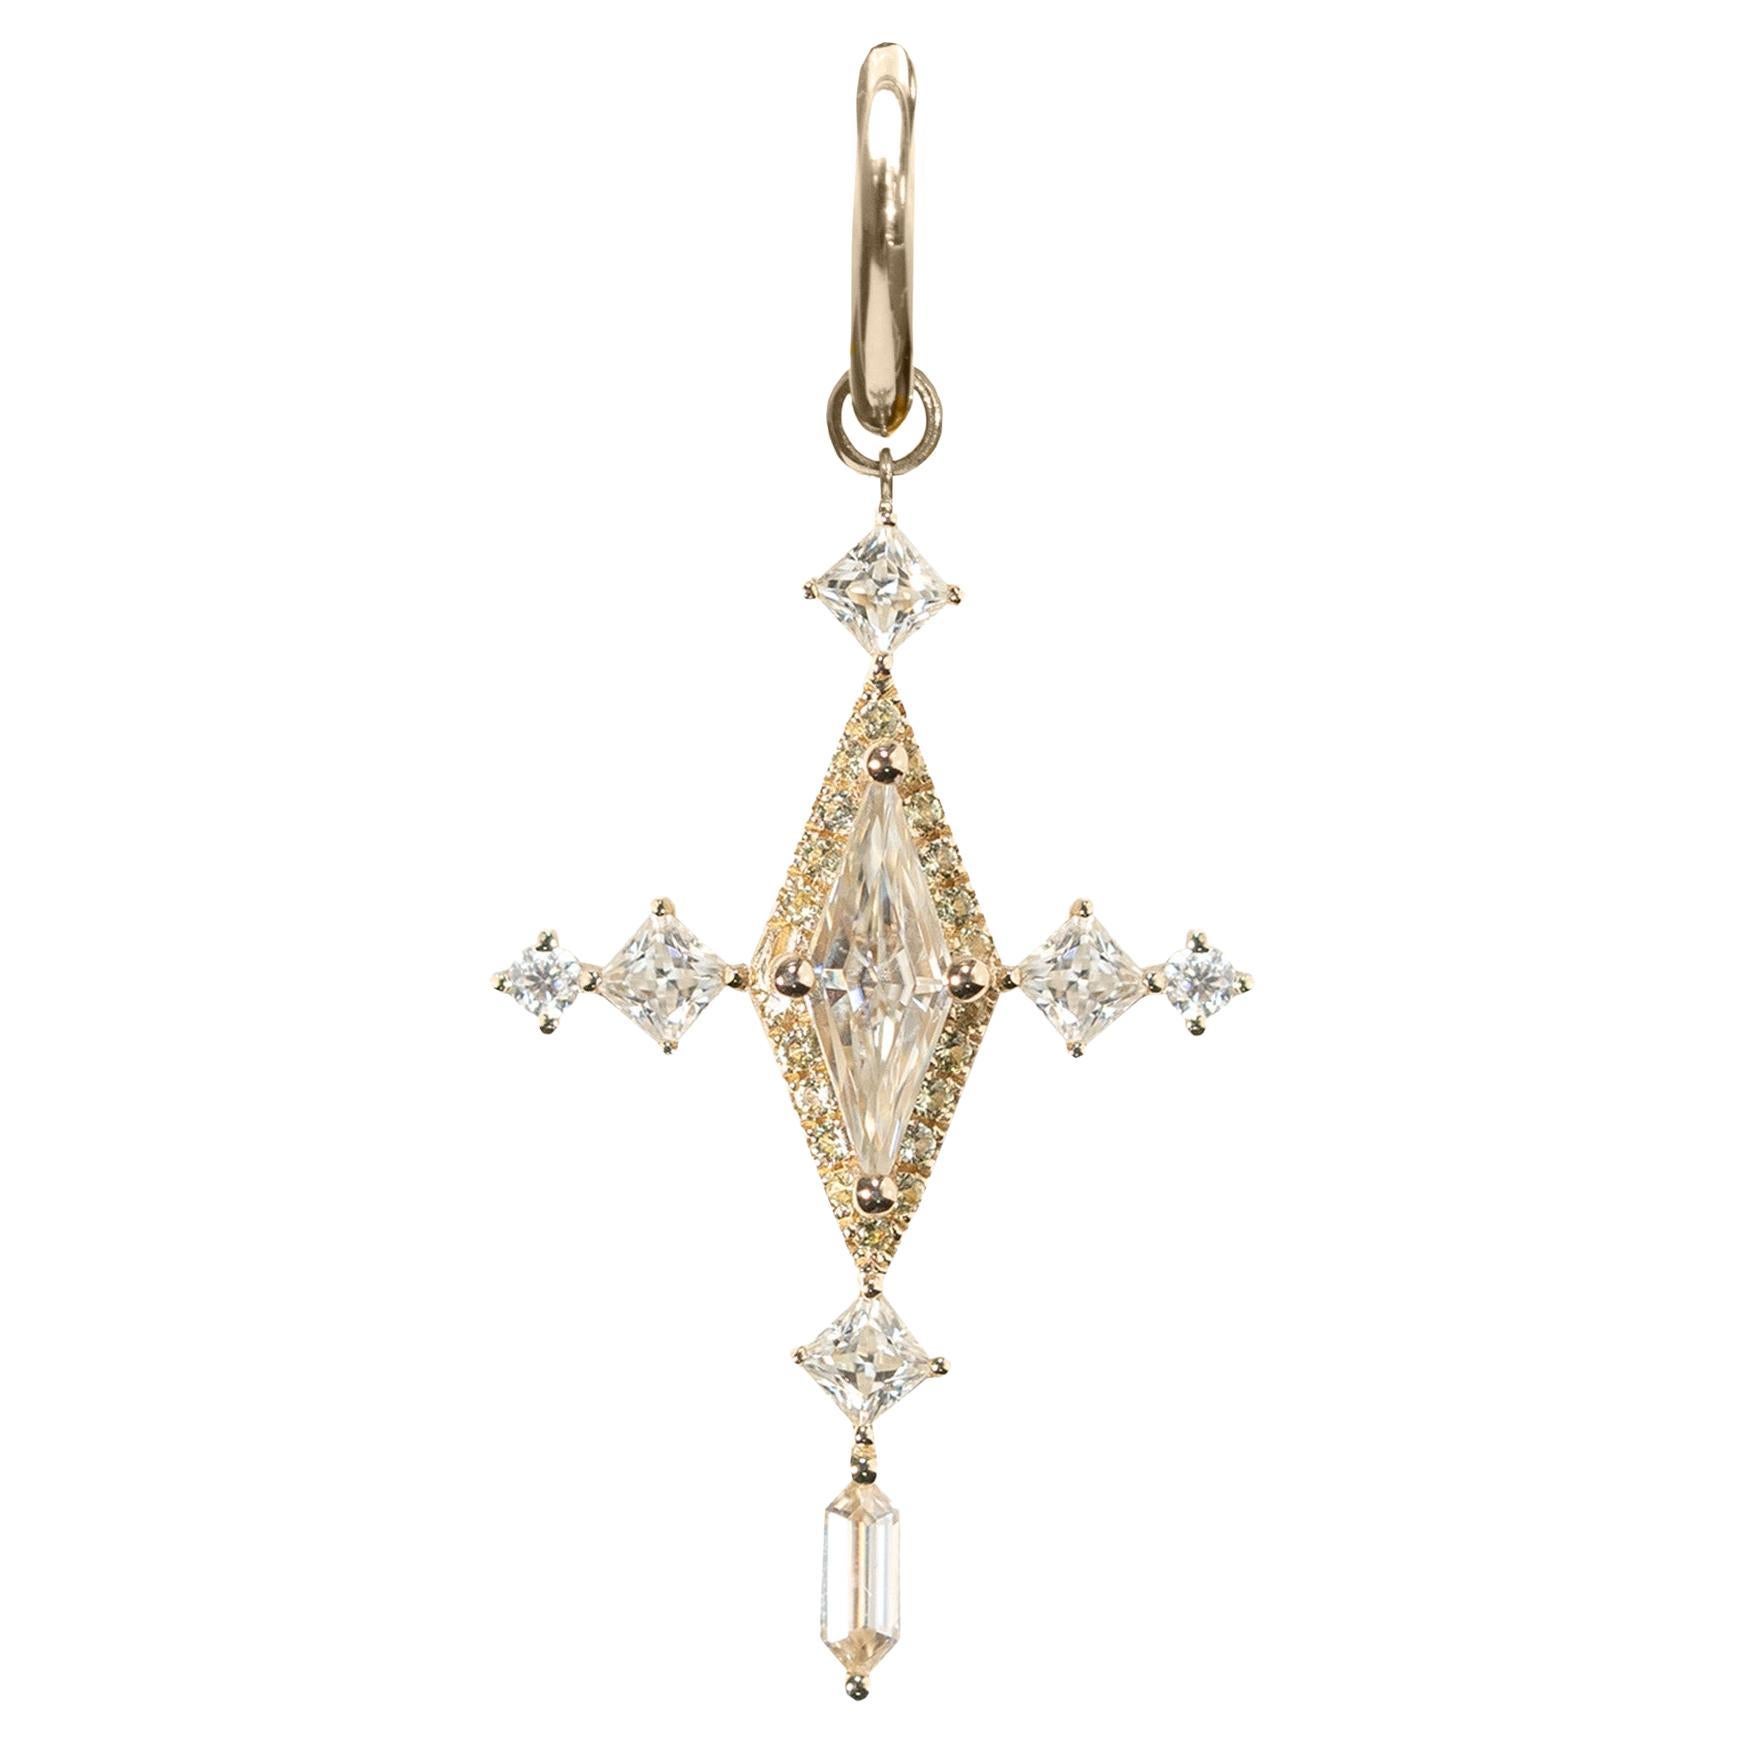 The Champagne Cross- 10kt Yellow Gold Drop Hoop Earring and Pendant